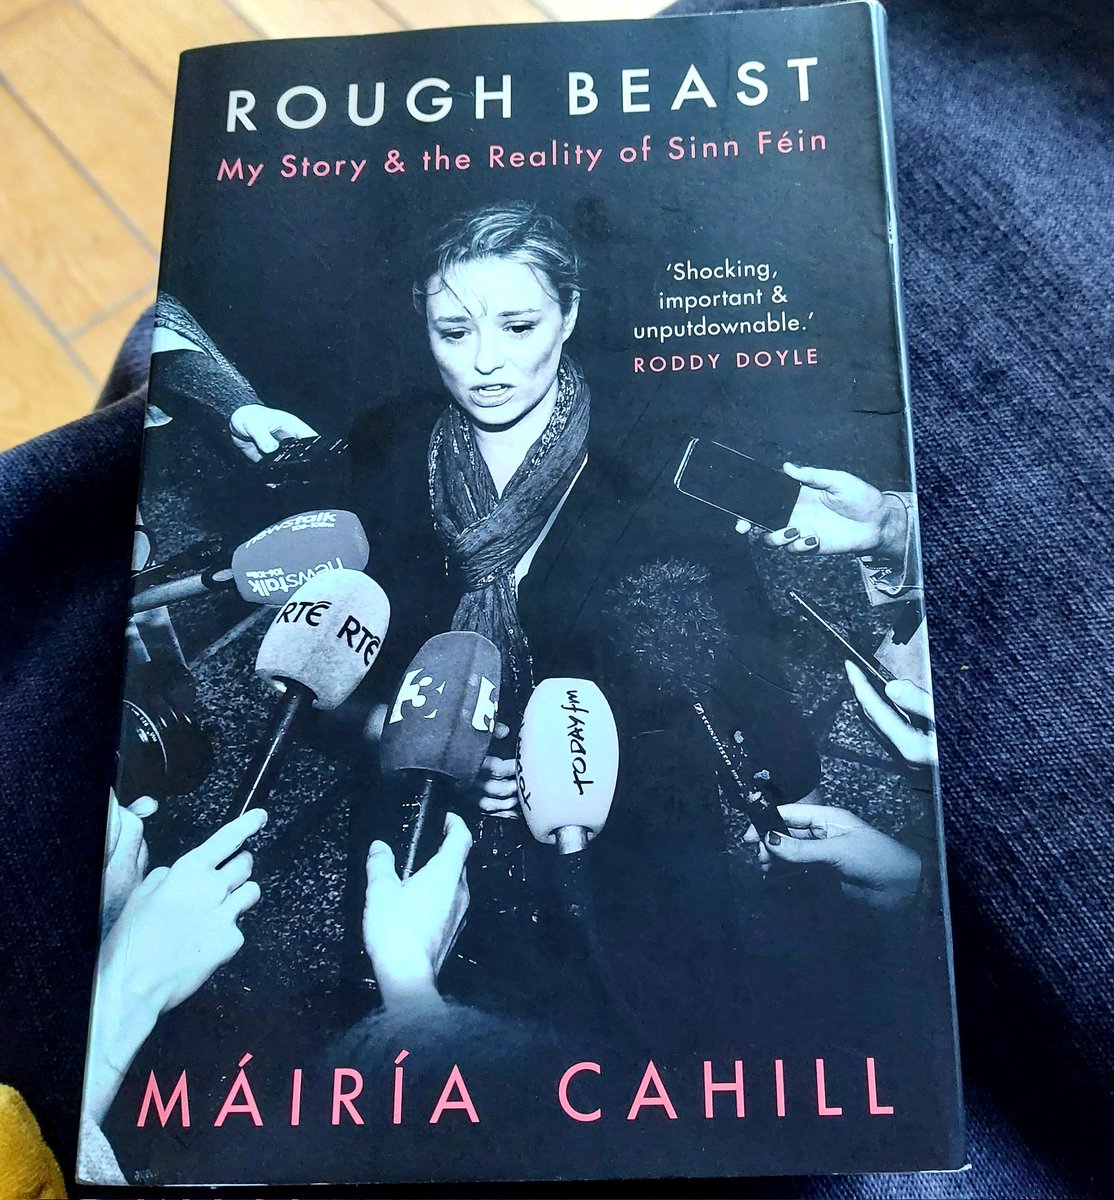 I finally got to read Màirìa Cahill's brave, courageous, and compelling account of her appalling abuse and the attempted cover up. This is a seriously powerful and eye-opening read. Well worth the time. 👏 @mairiac31 #Justice